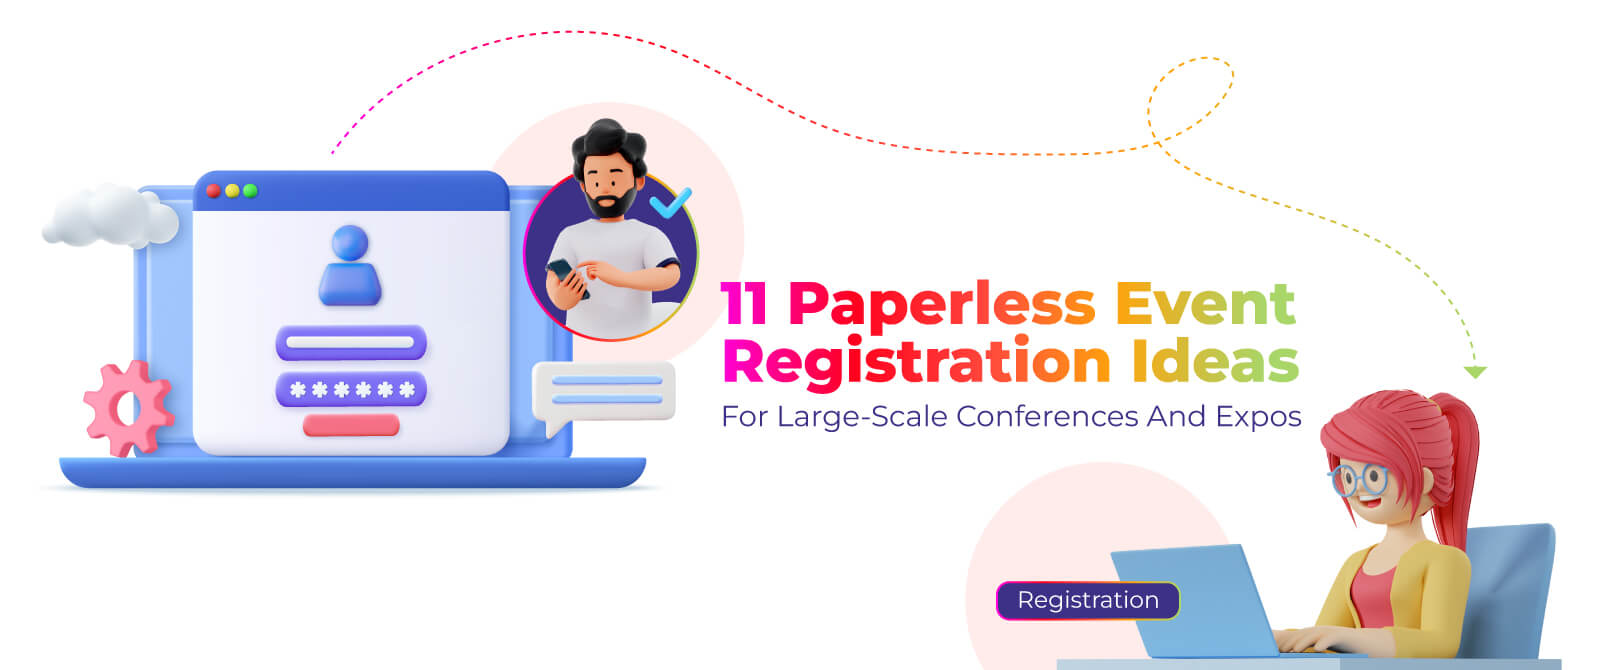 11 Paperless Event Registration Ideas for Large-Scale Conferences and Expos